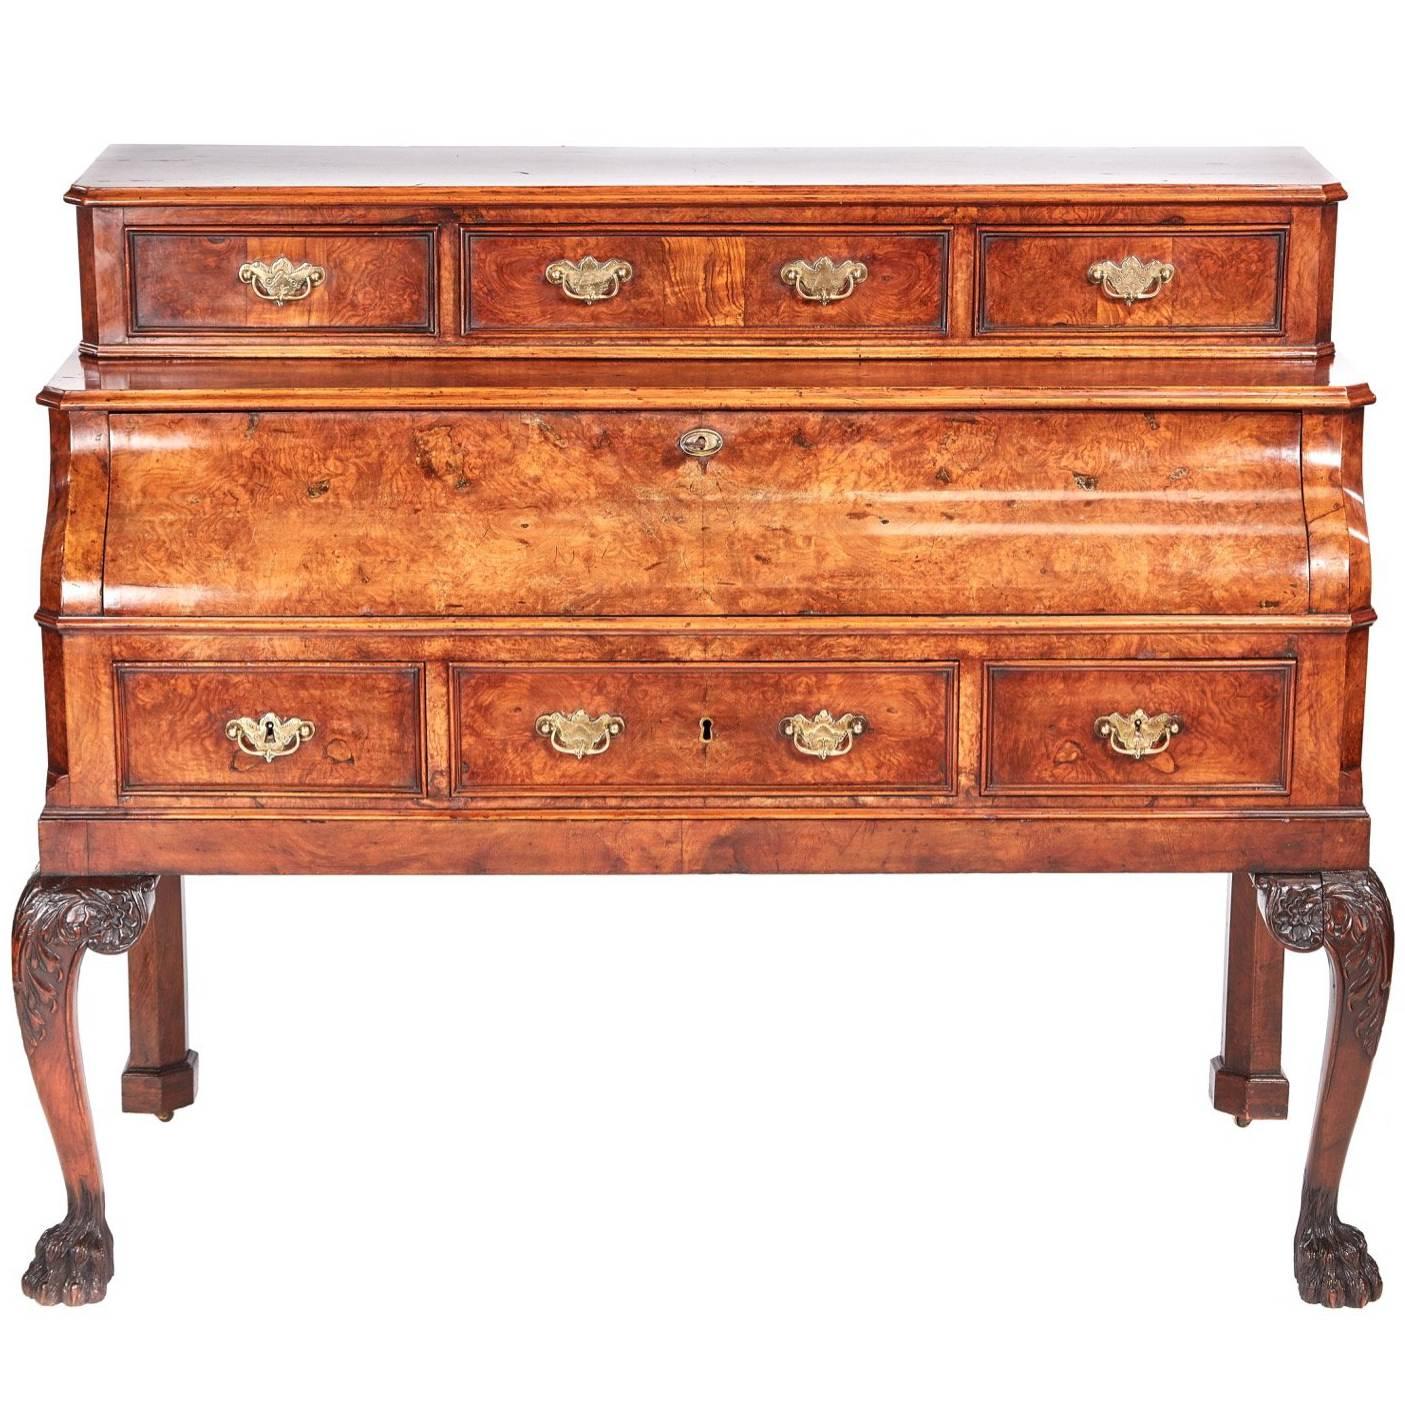 Outstanding Quality Victorian Burr Walnut Desk For Sale